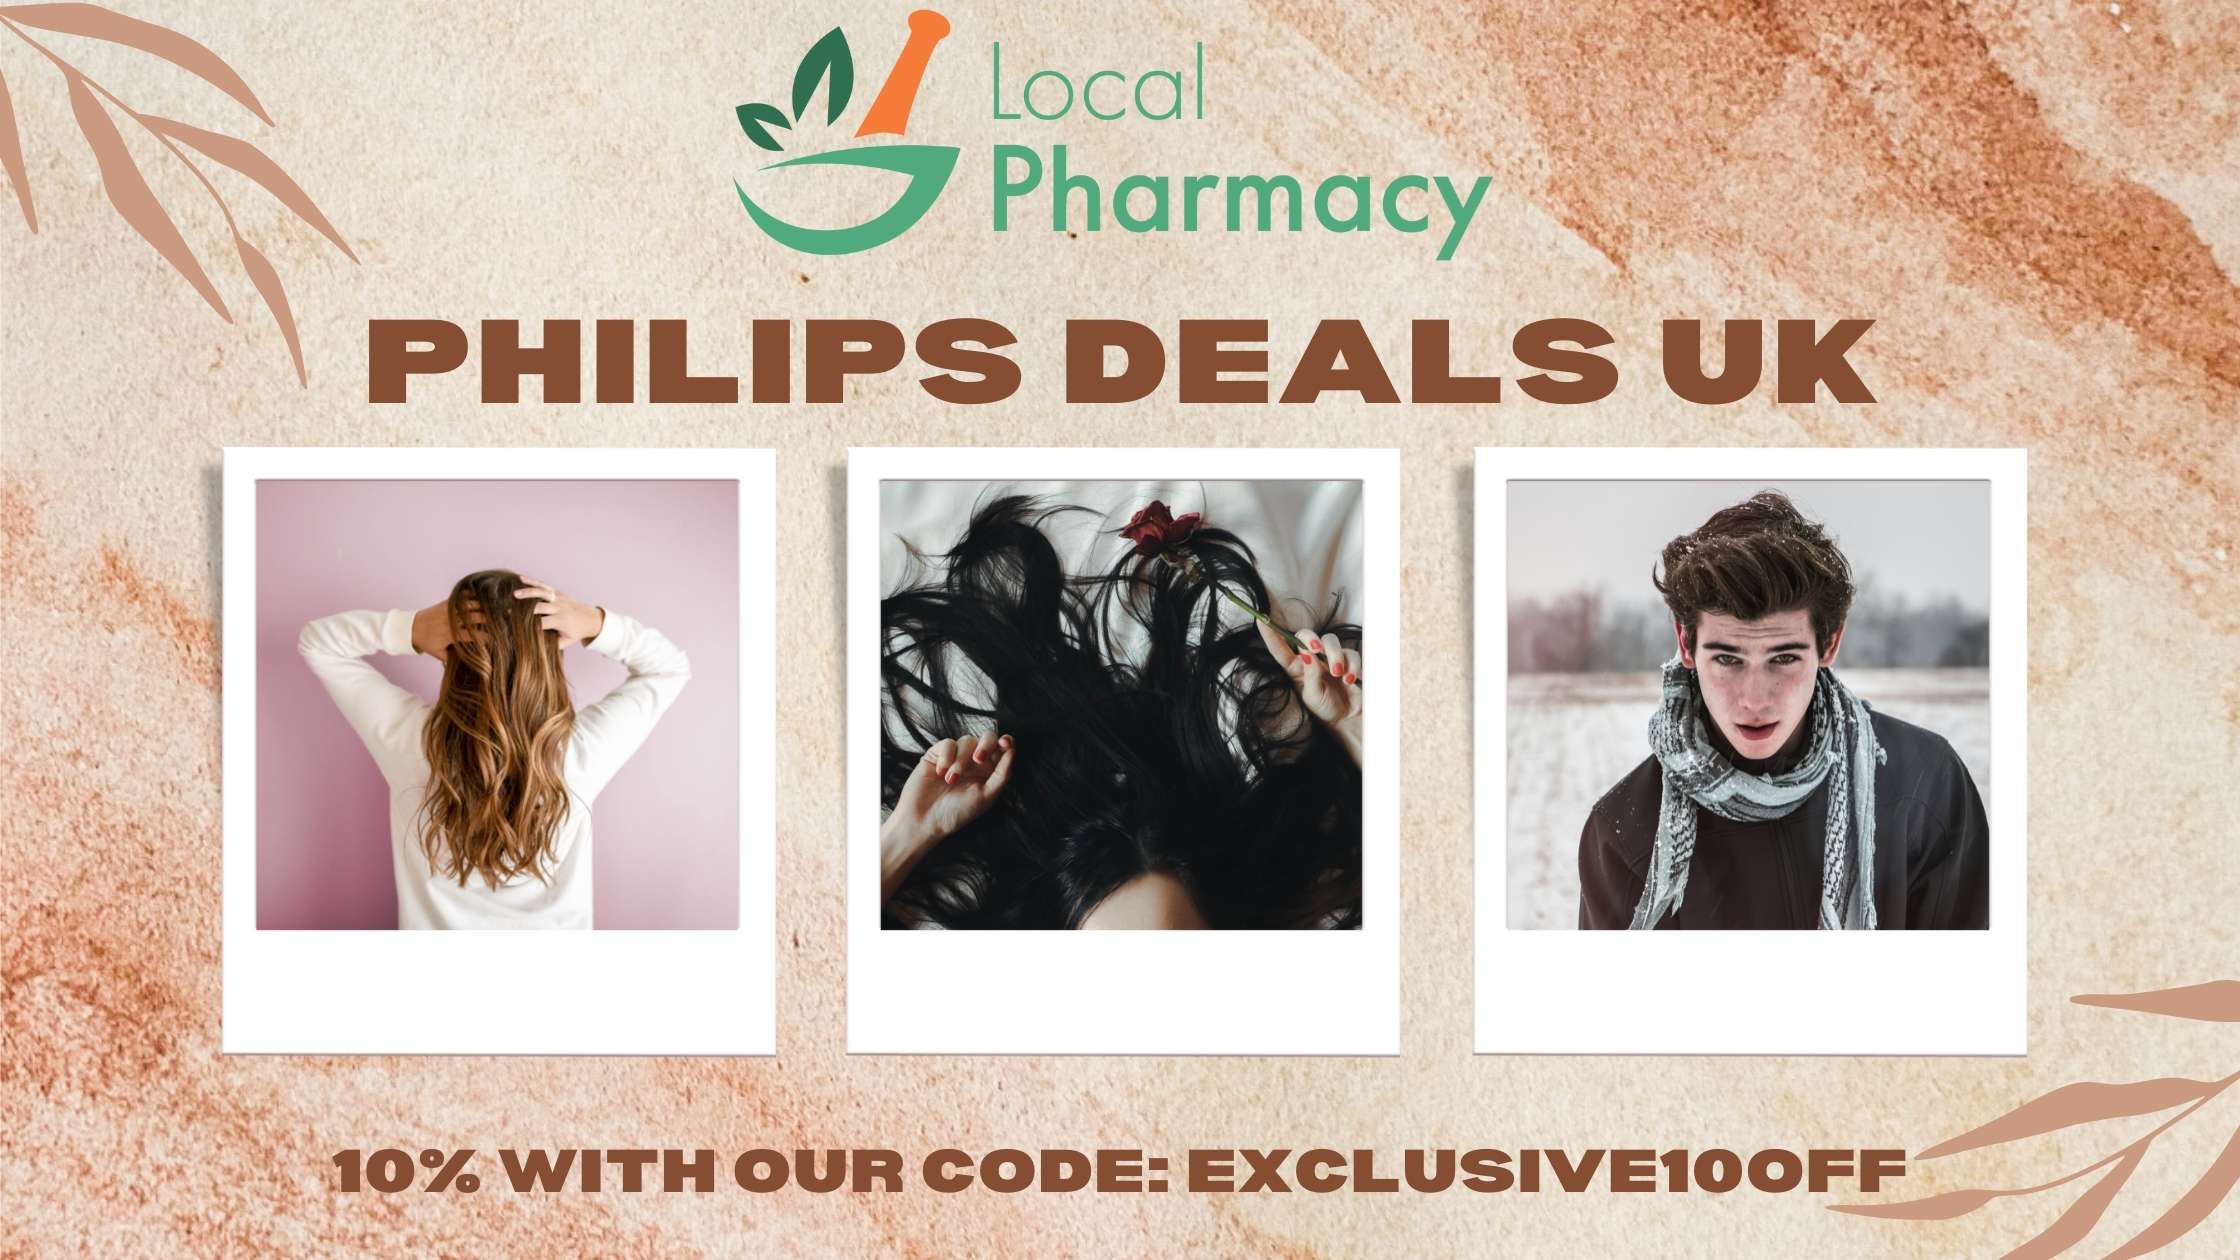 Philips coupon code and deals uk